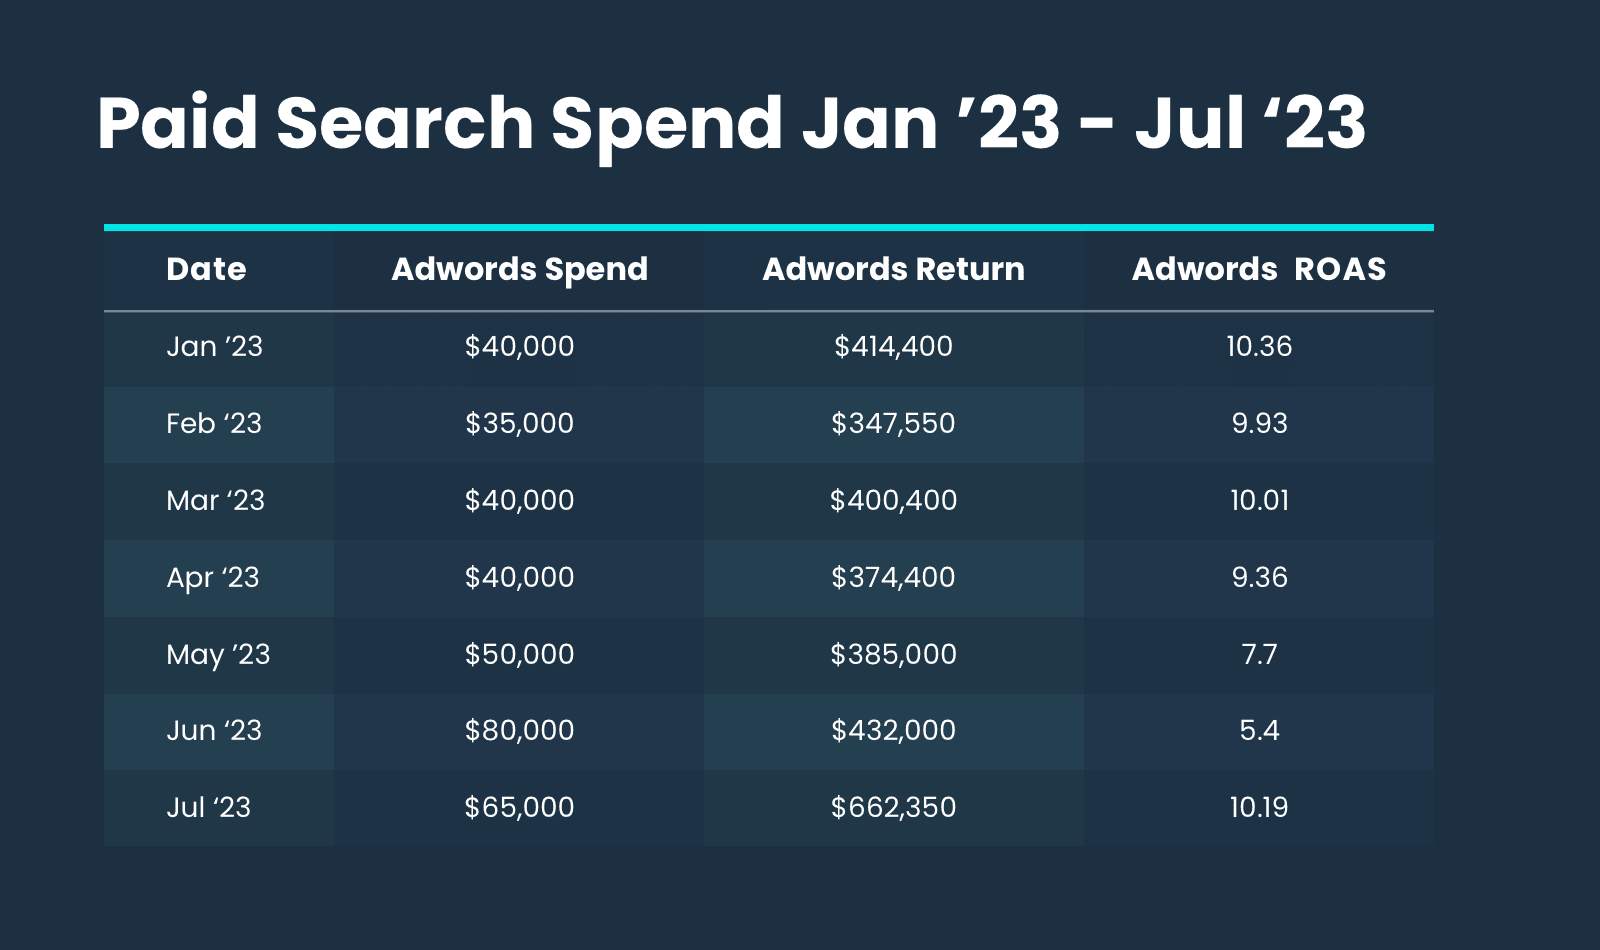 Paid Search (Google Adwords) Spend for our sample ecommerce business from January 2023 through July 2023